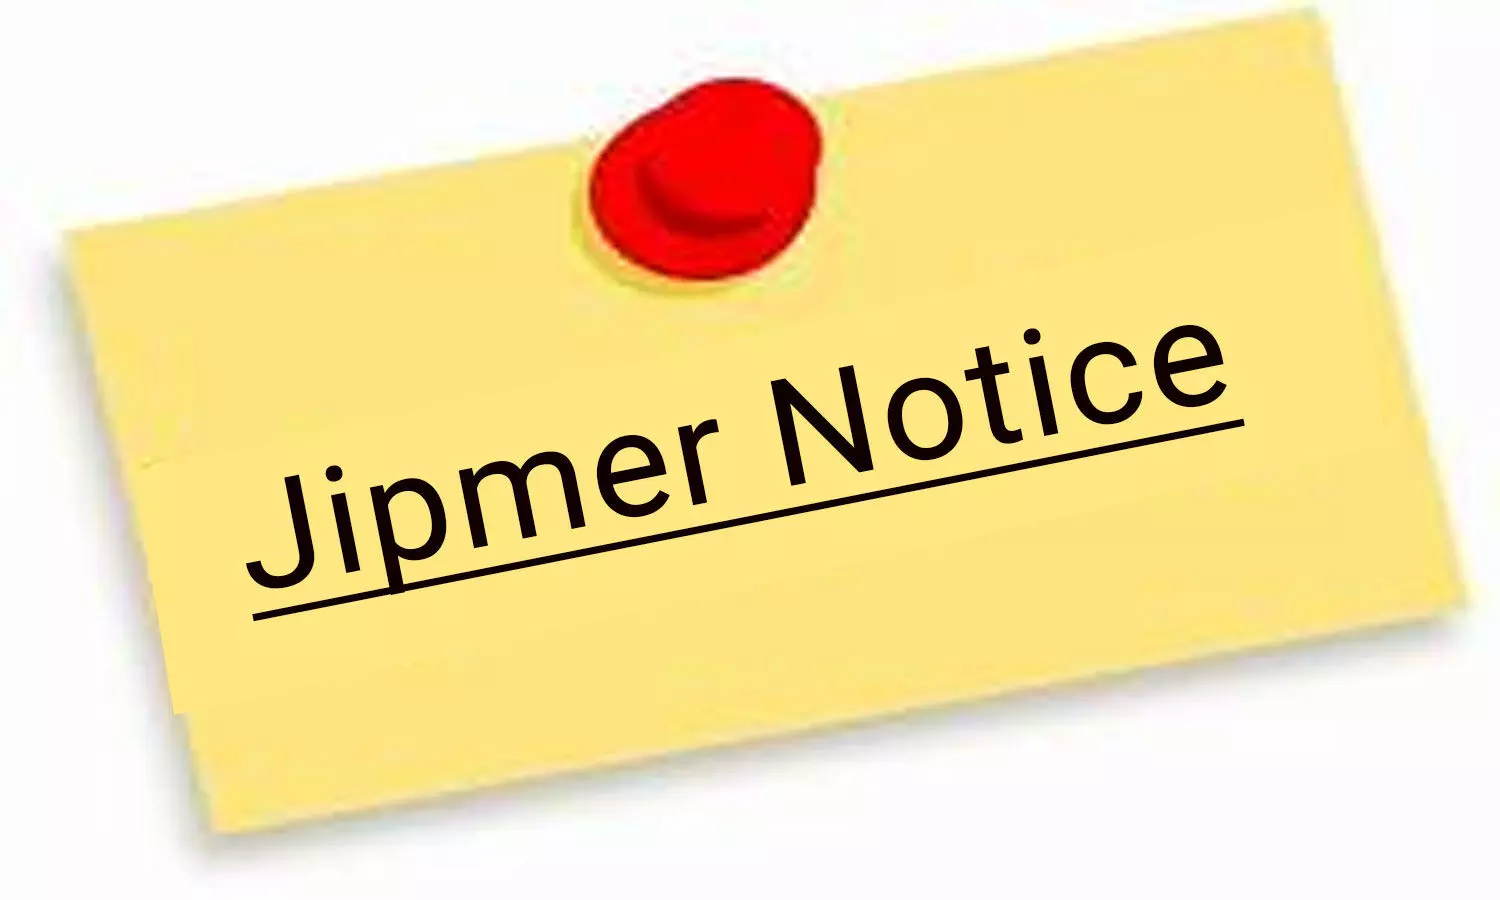 Payment of Exit Exam Fee for MSc Nursing Courses June 2020: JIPMER issues notice